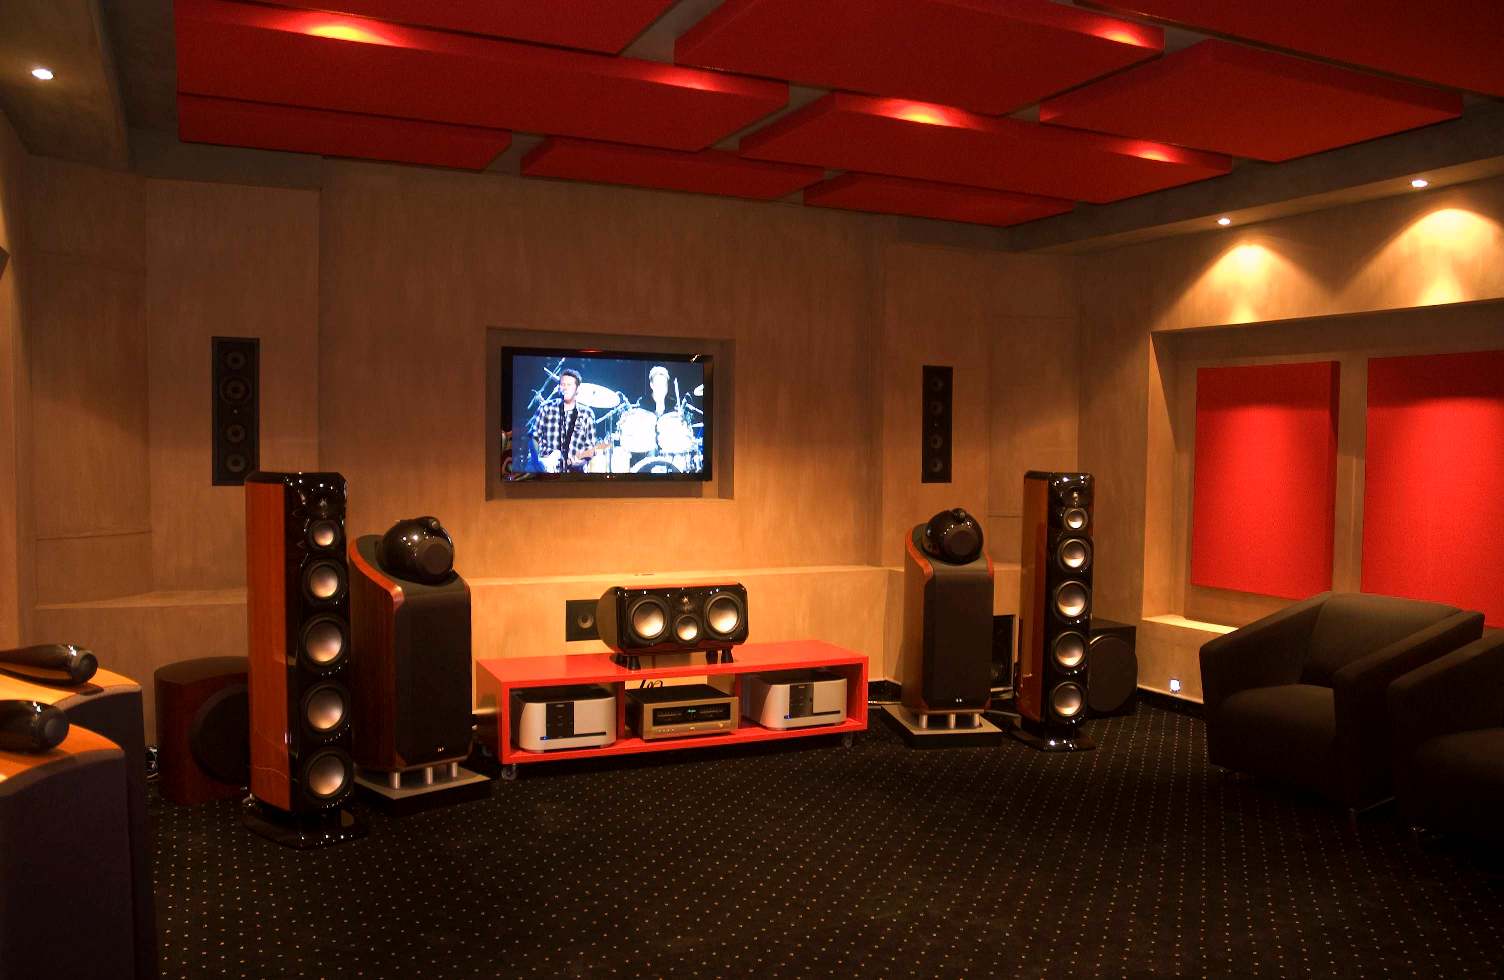 Wall To Also Best Wall To Wall Carpet Also Red Painted Ceiling And Freestanding Speakers In Cool Home Theater Idea Decoration  Make Your Own Private Home Theatre 